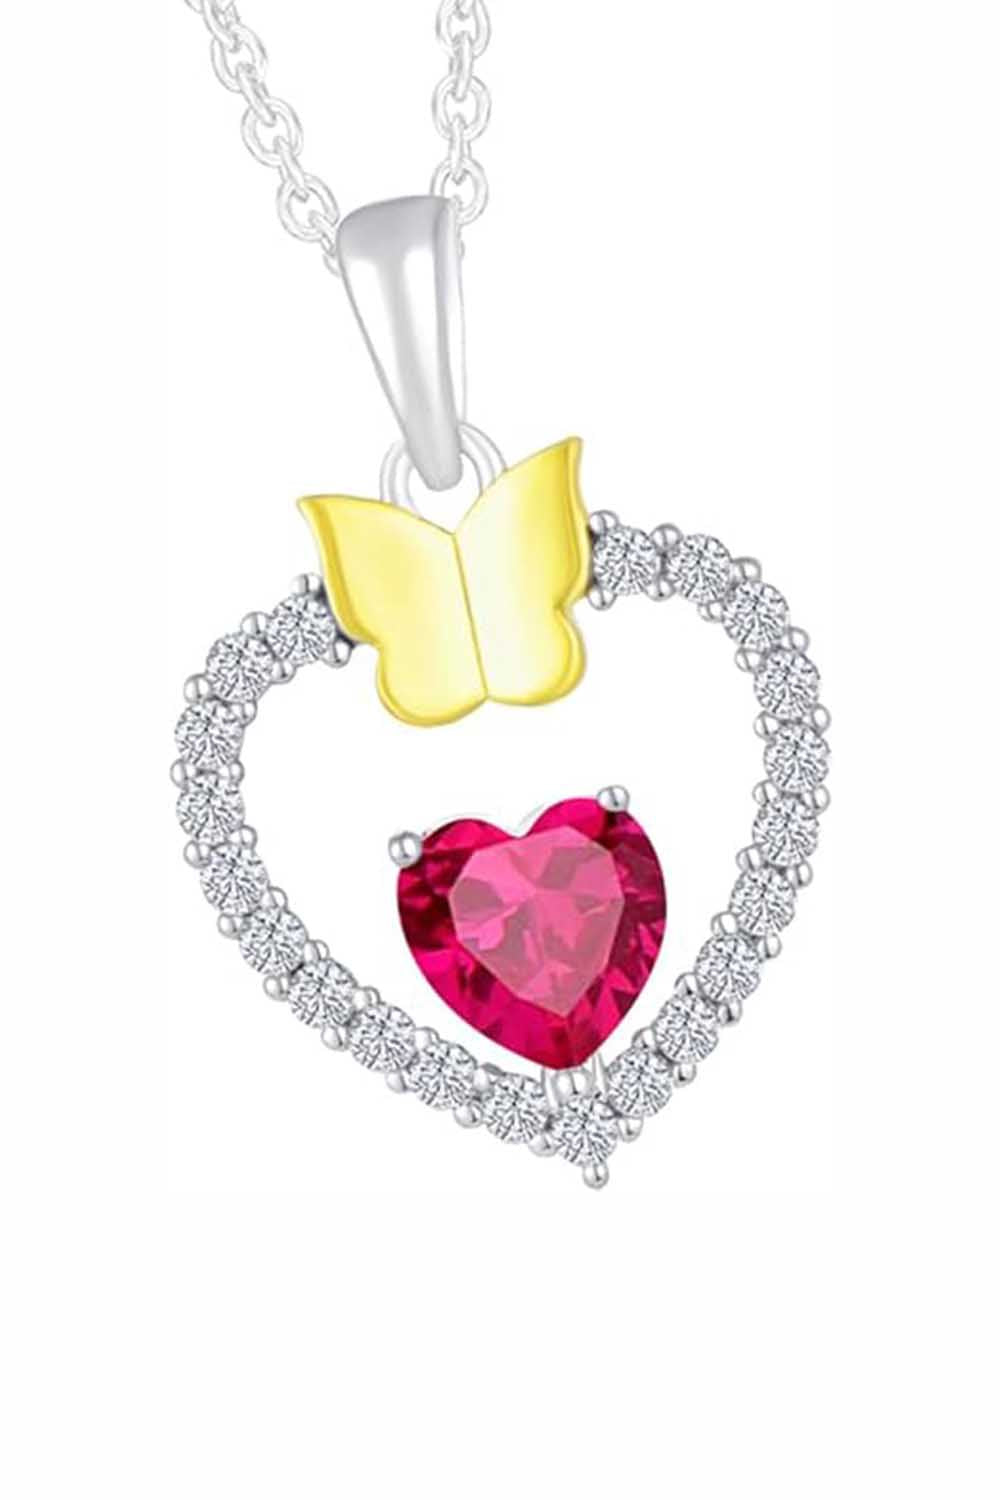 Ruby Gemstone Heart with Butterfly Pendant Necklace